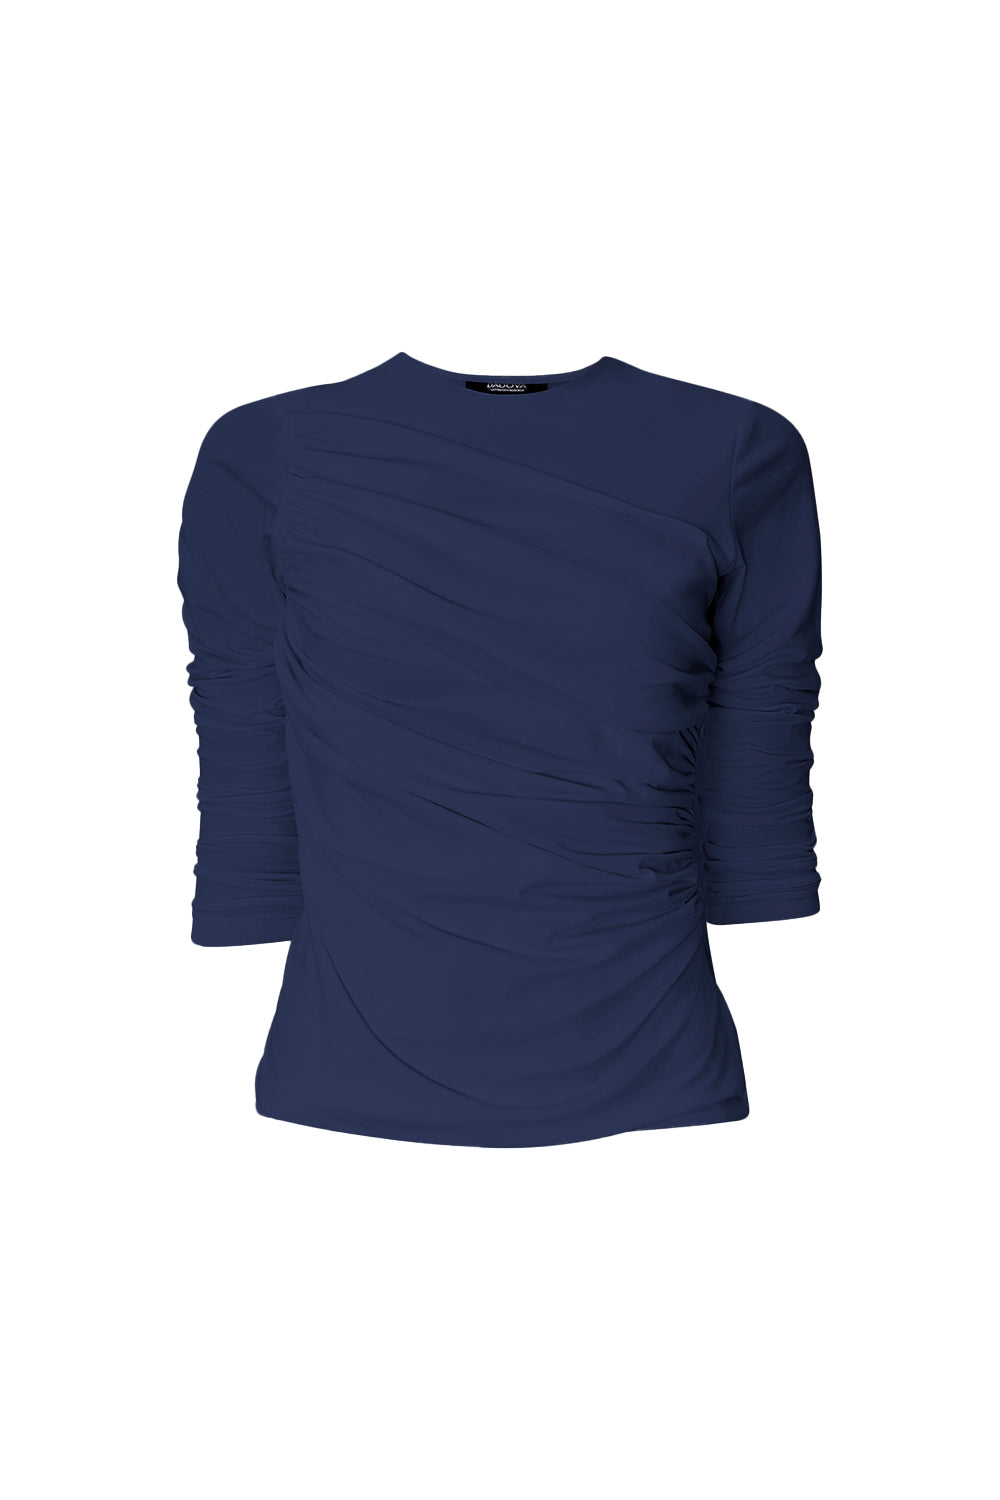 Navy Invisible Threads T-shirt